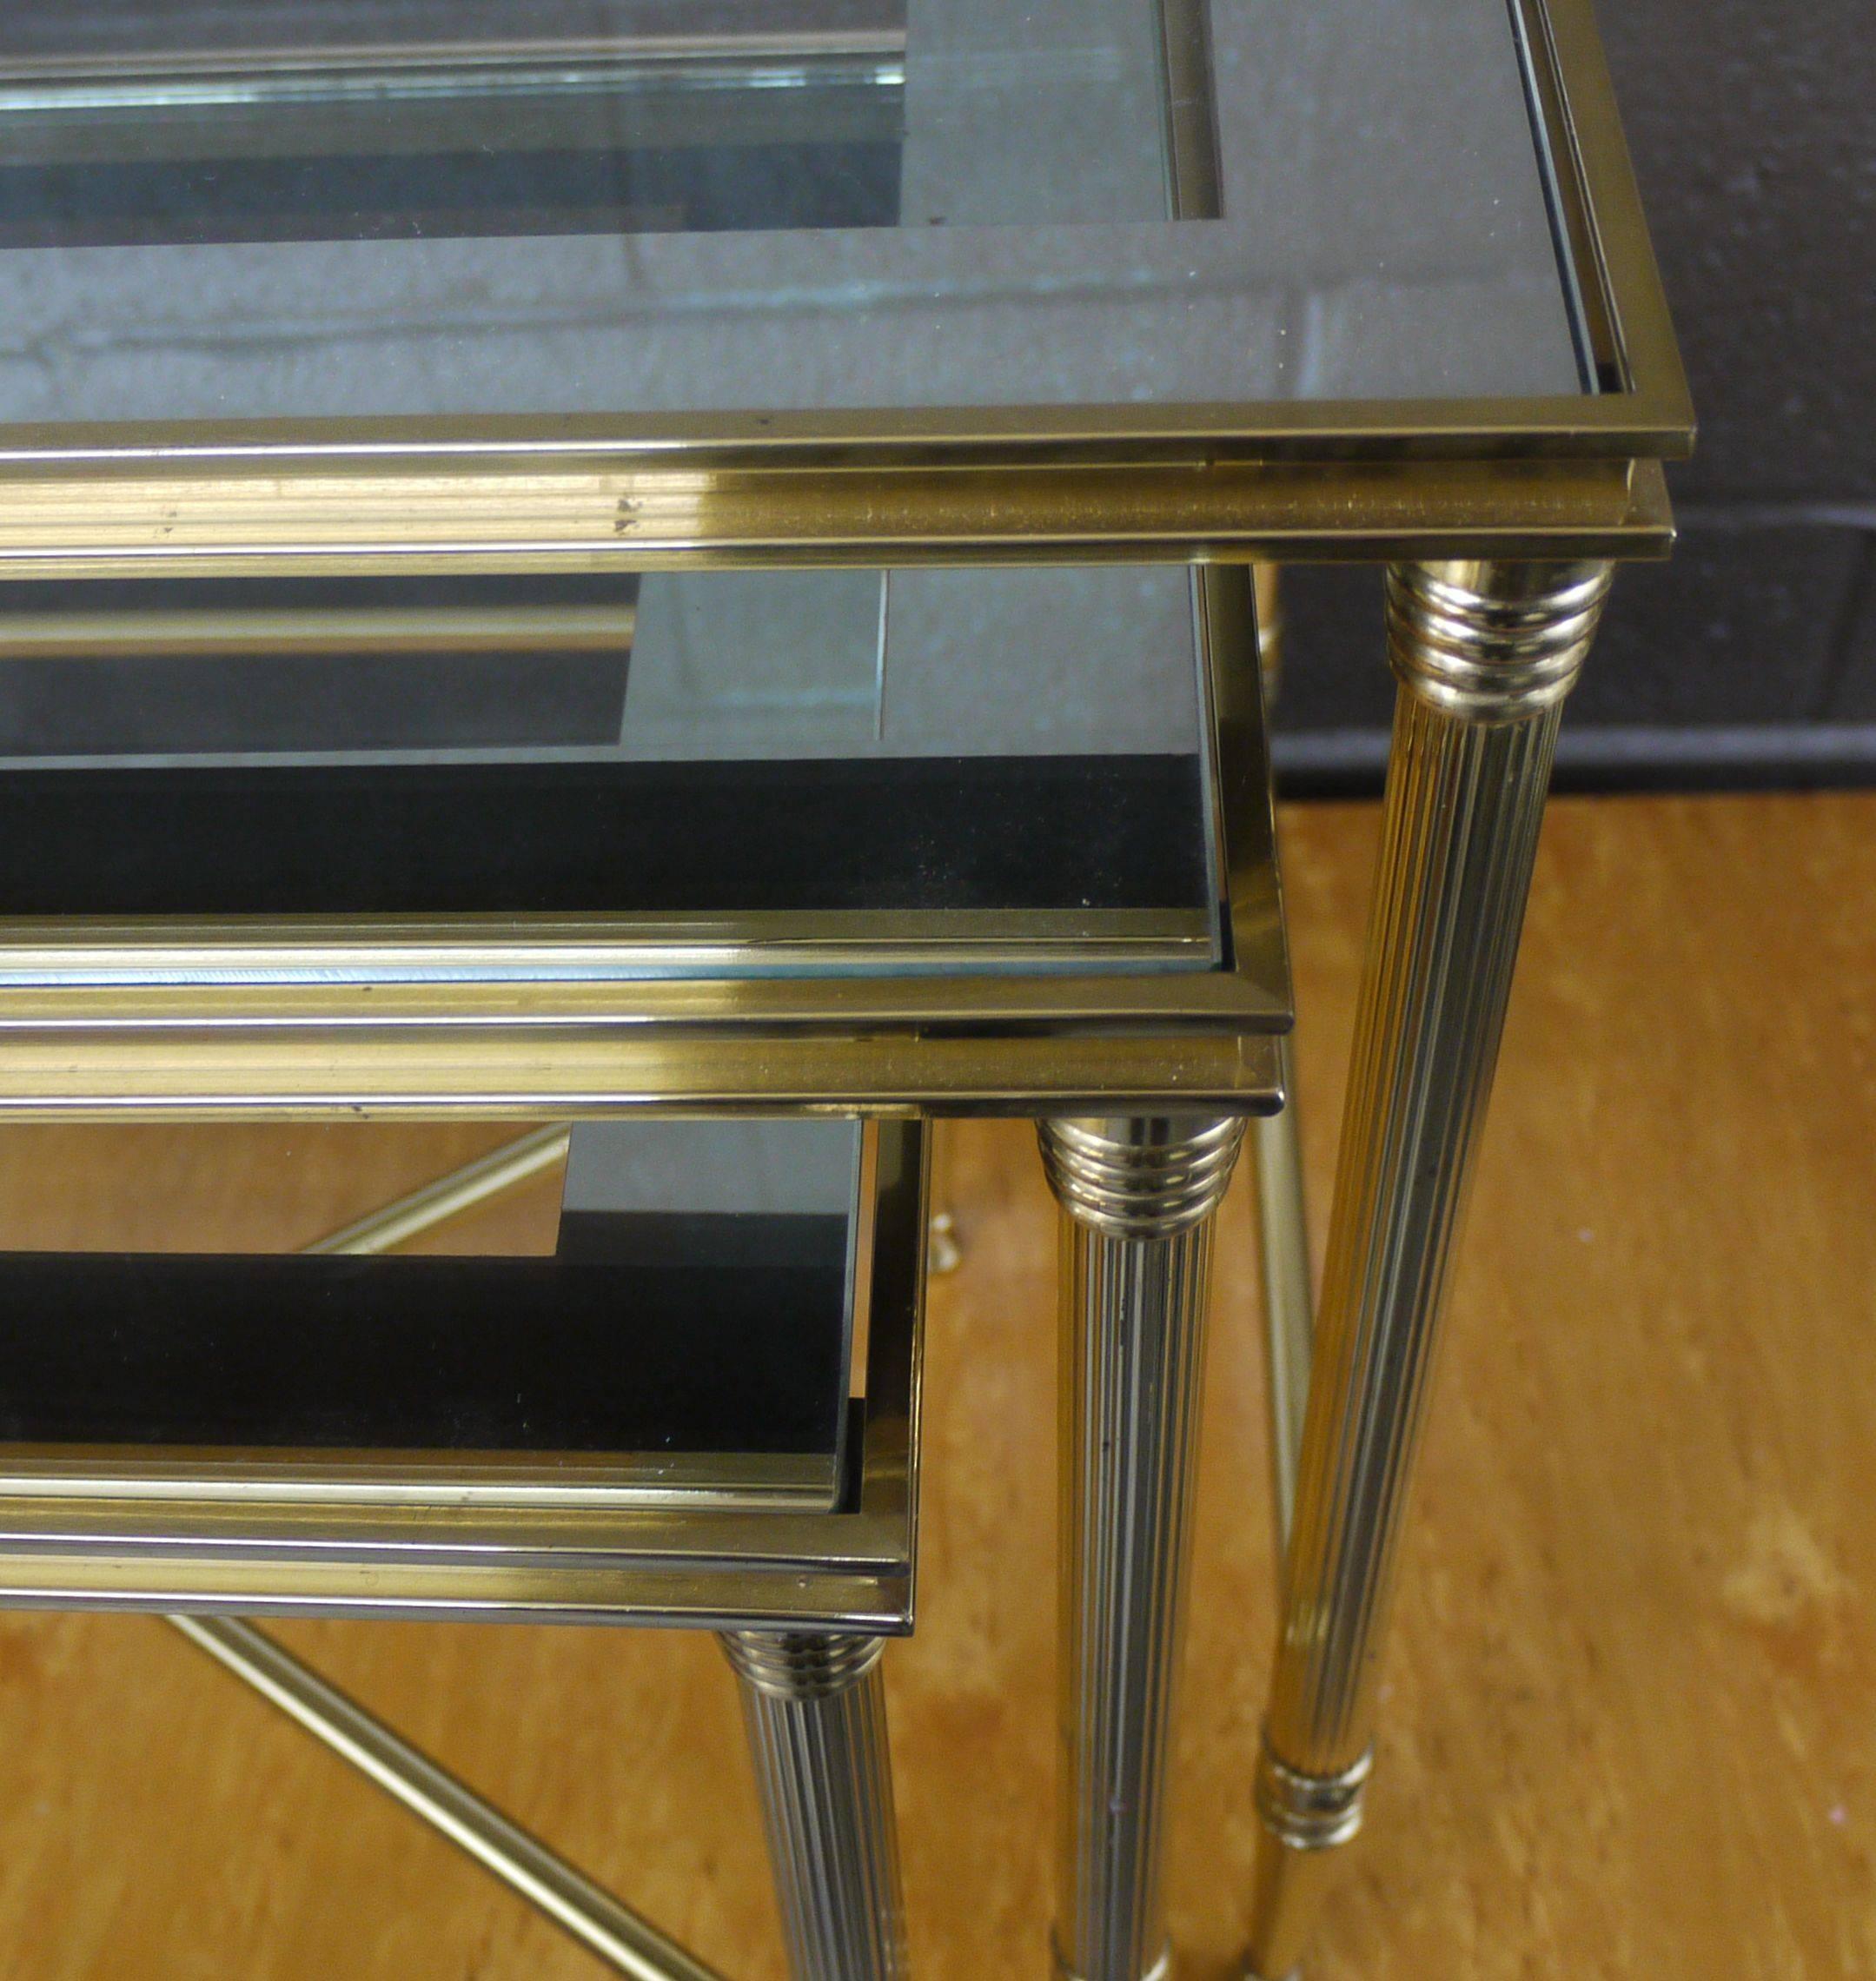 Set of neoclassical polished brass nesting tables, American, circa 1960s. Terrific shape, with original mirrored edge glass.